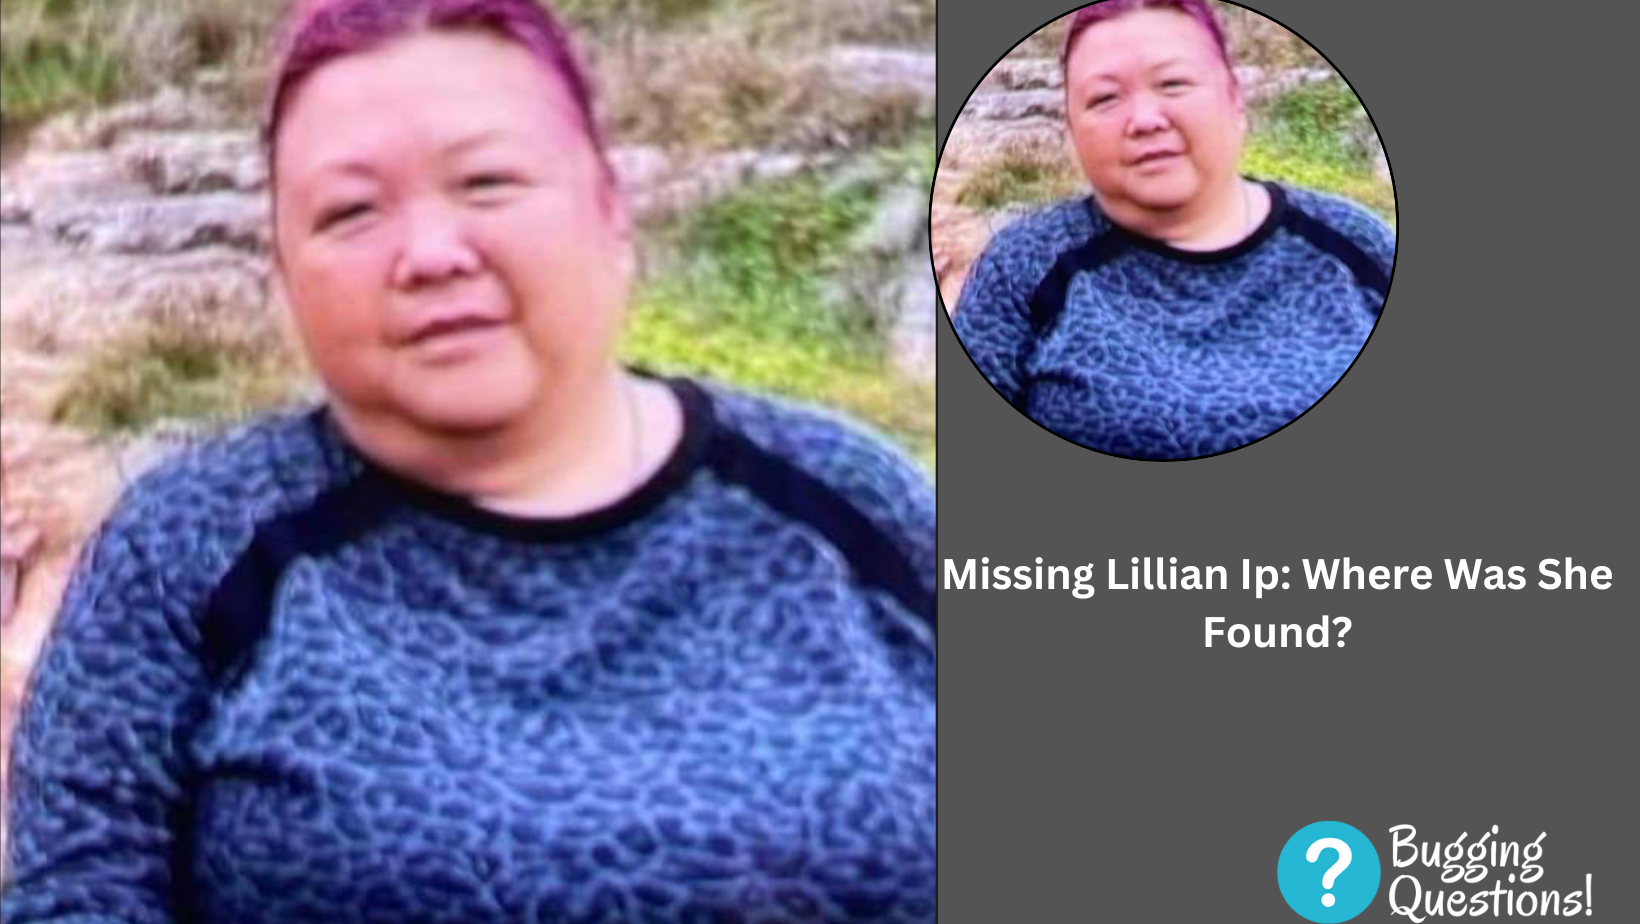 Missing Lillian Ip: Where Was She Found?